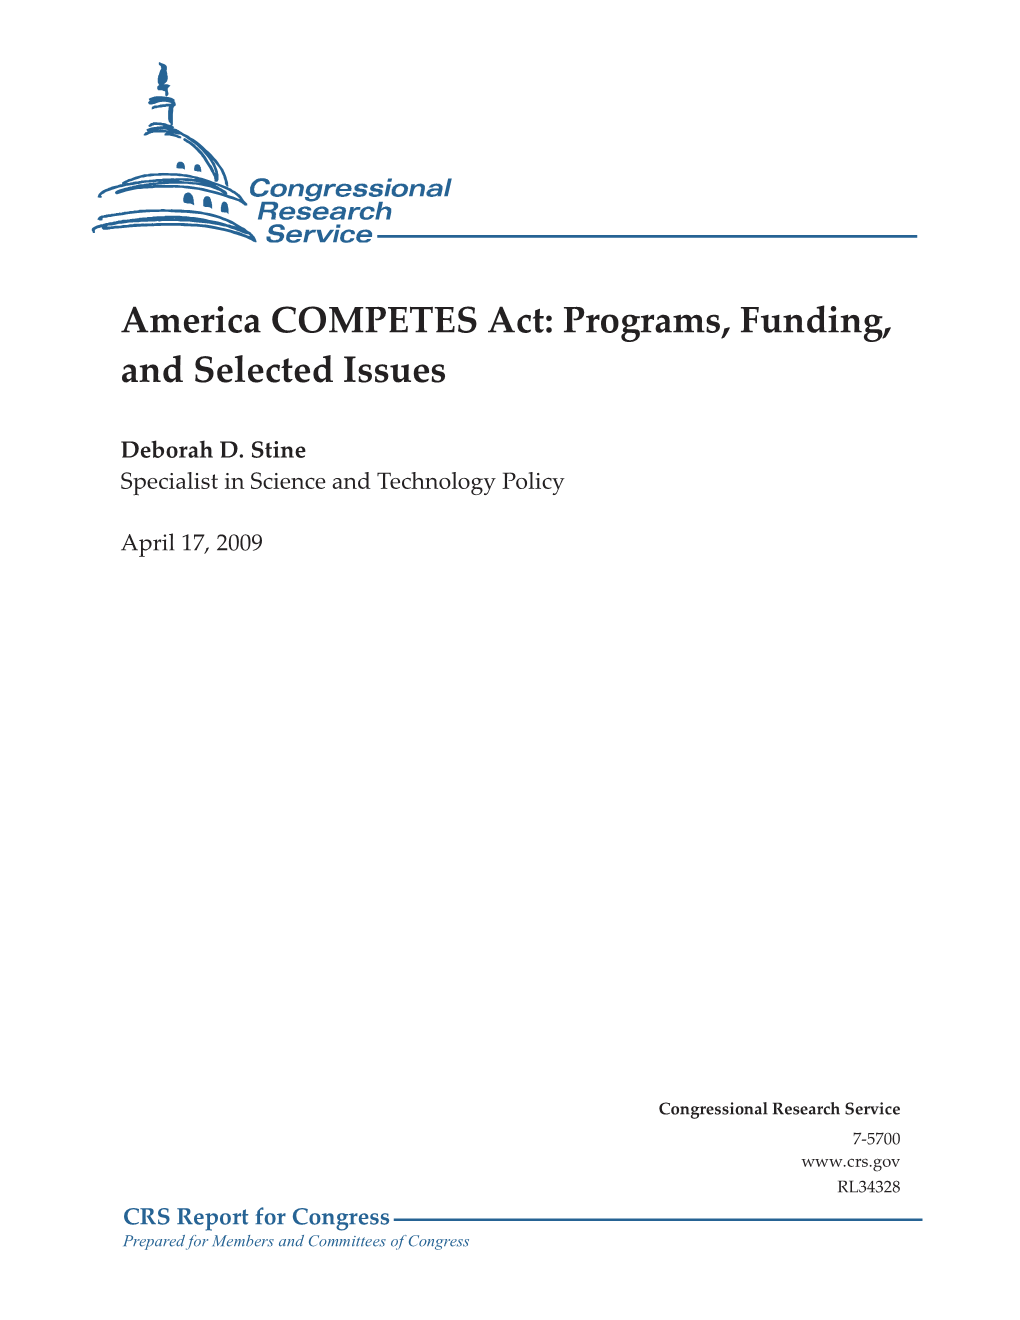 America COMPETES Act: Programs, Funding, and Selected Issues